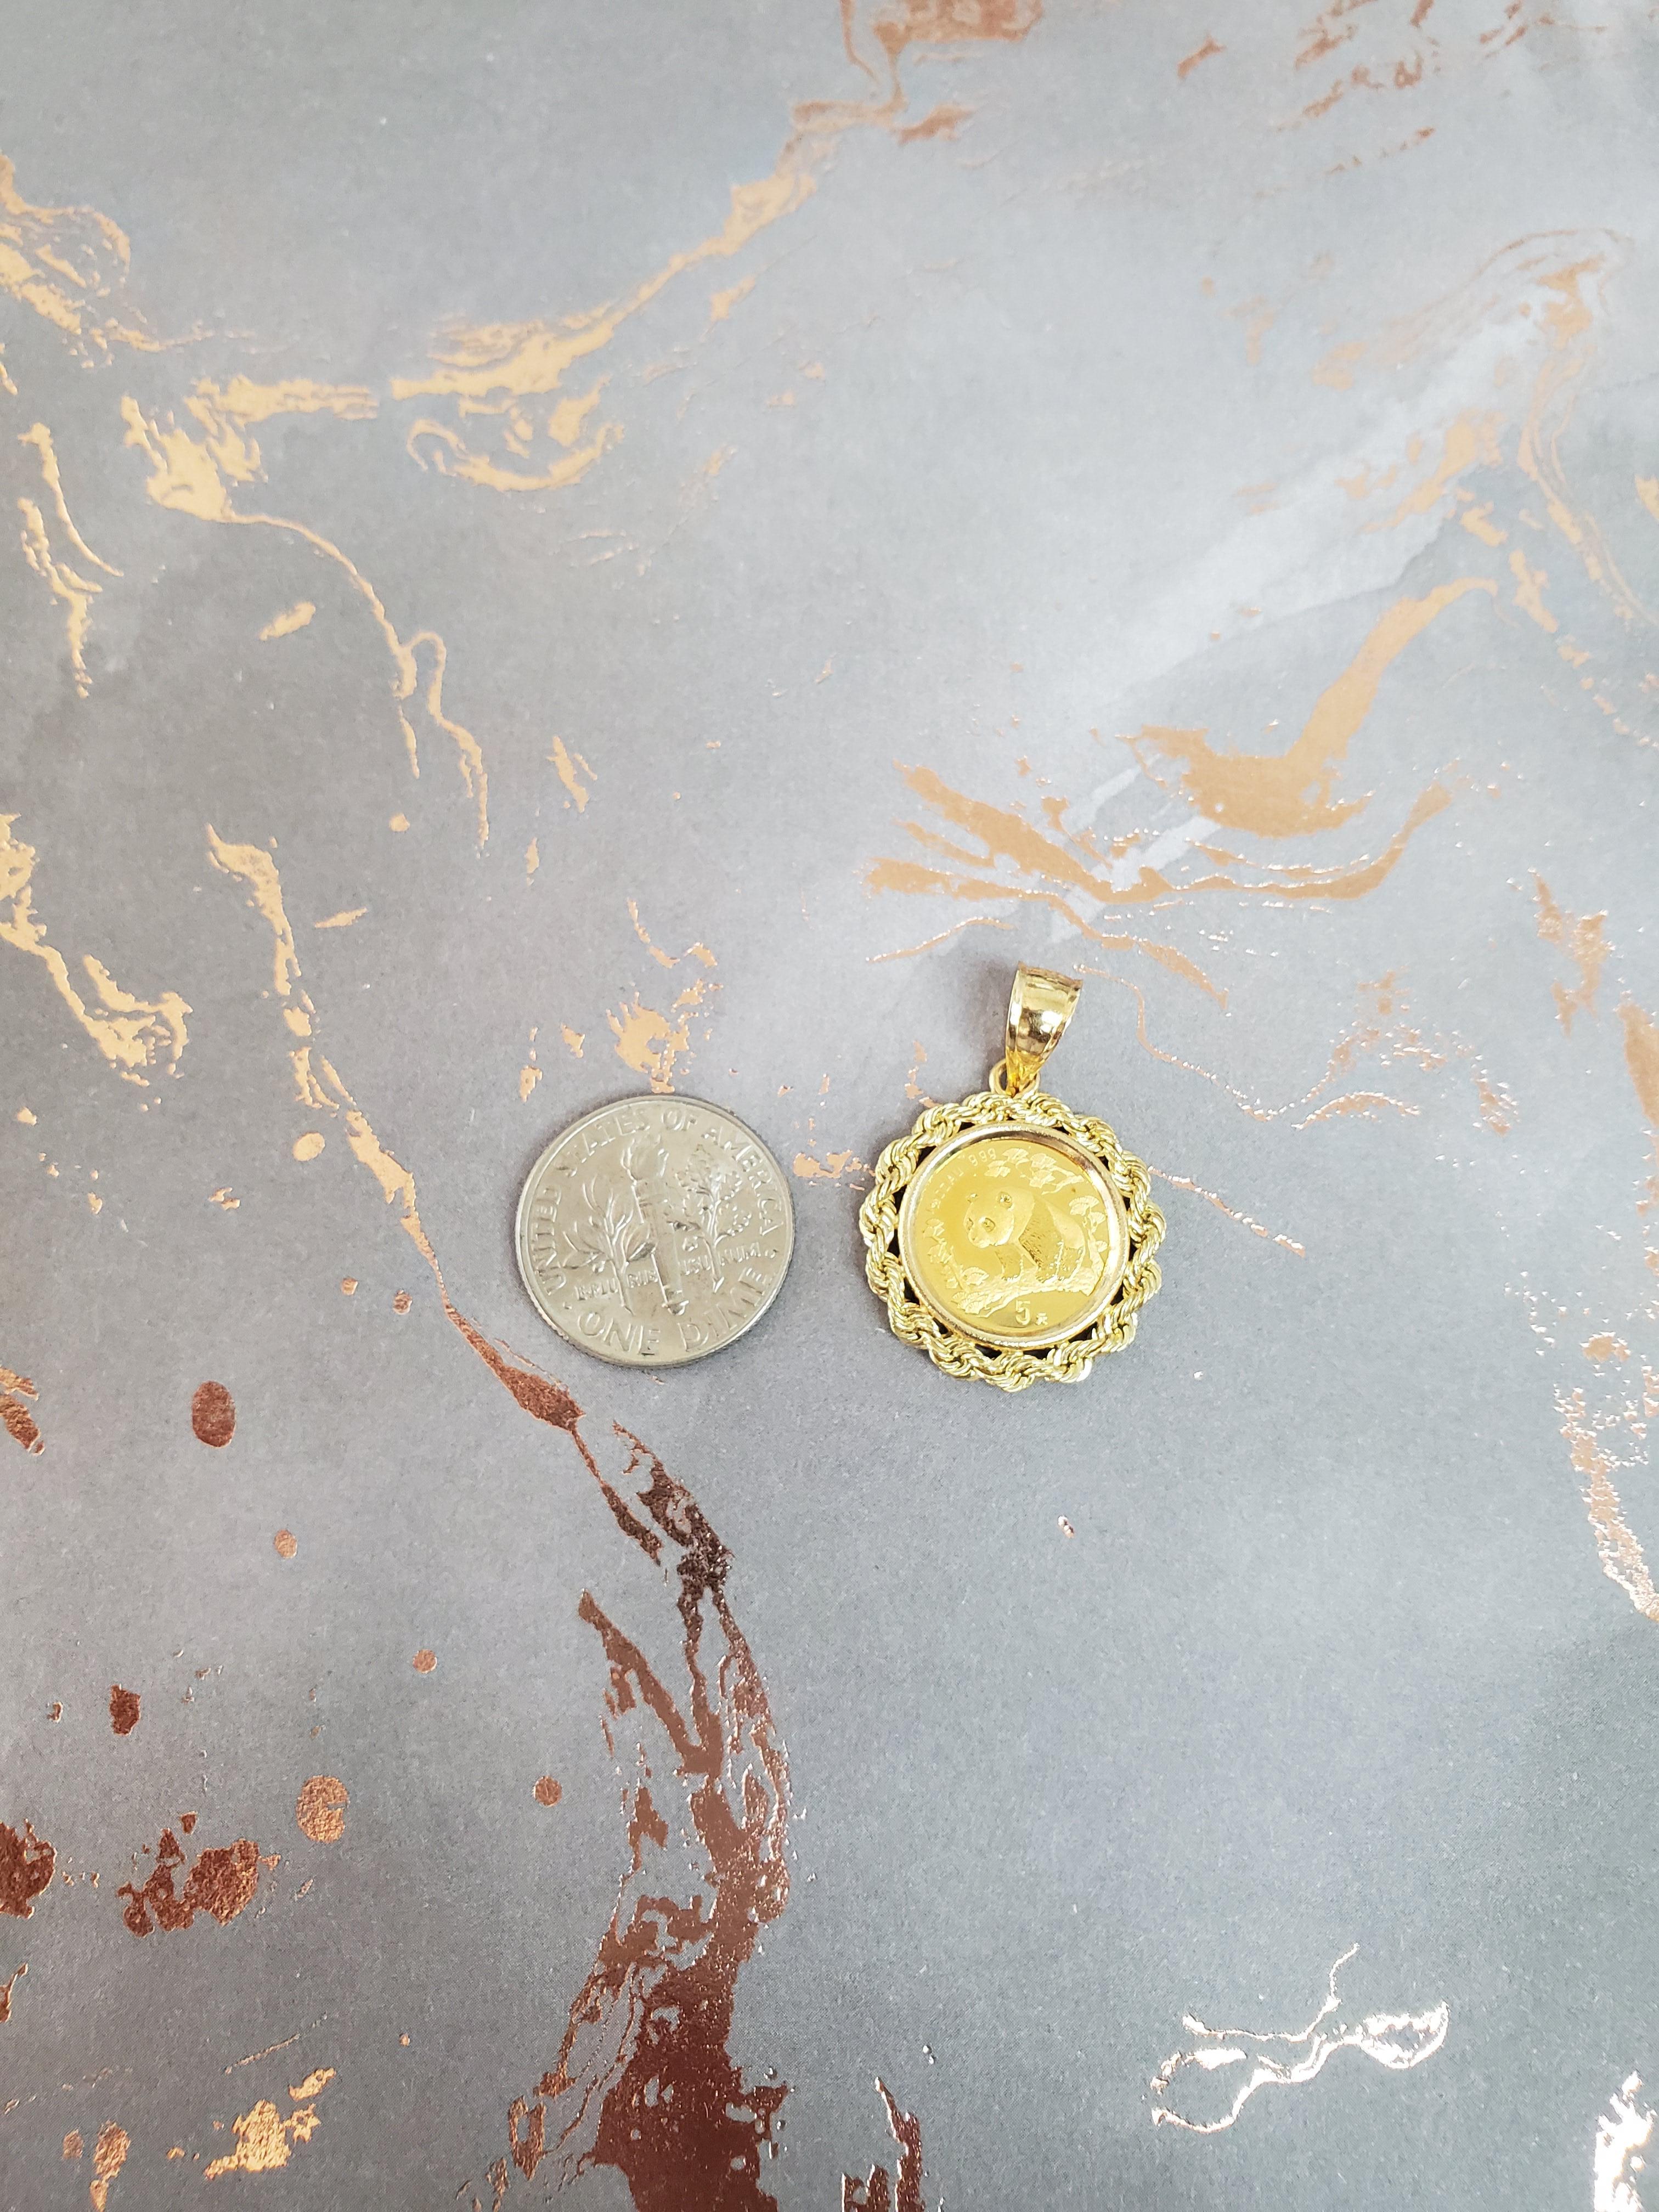 ♥ Coin Information  ♥

Type: Coin
Metal Content: 1/20OZ
Country: China
Year: Varies
Denomination: 5 Yuan
Composition: .999 Gold

 ♥ Bezel Information  ♥

Halo Setting Material: 14k Yellow Gold
Dimensions: 27 mm x 19 mm w. bail
Weight: 3 grams